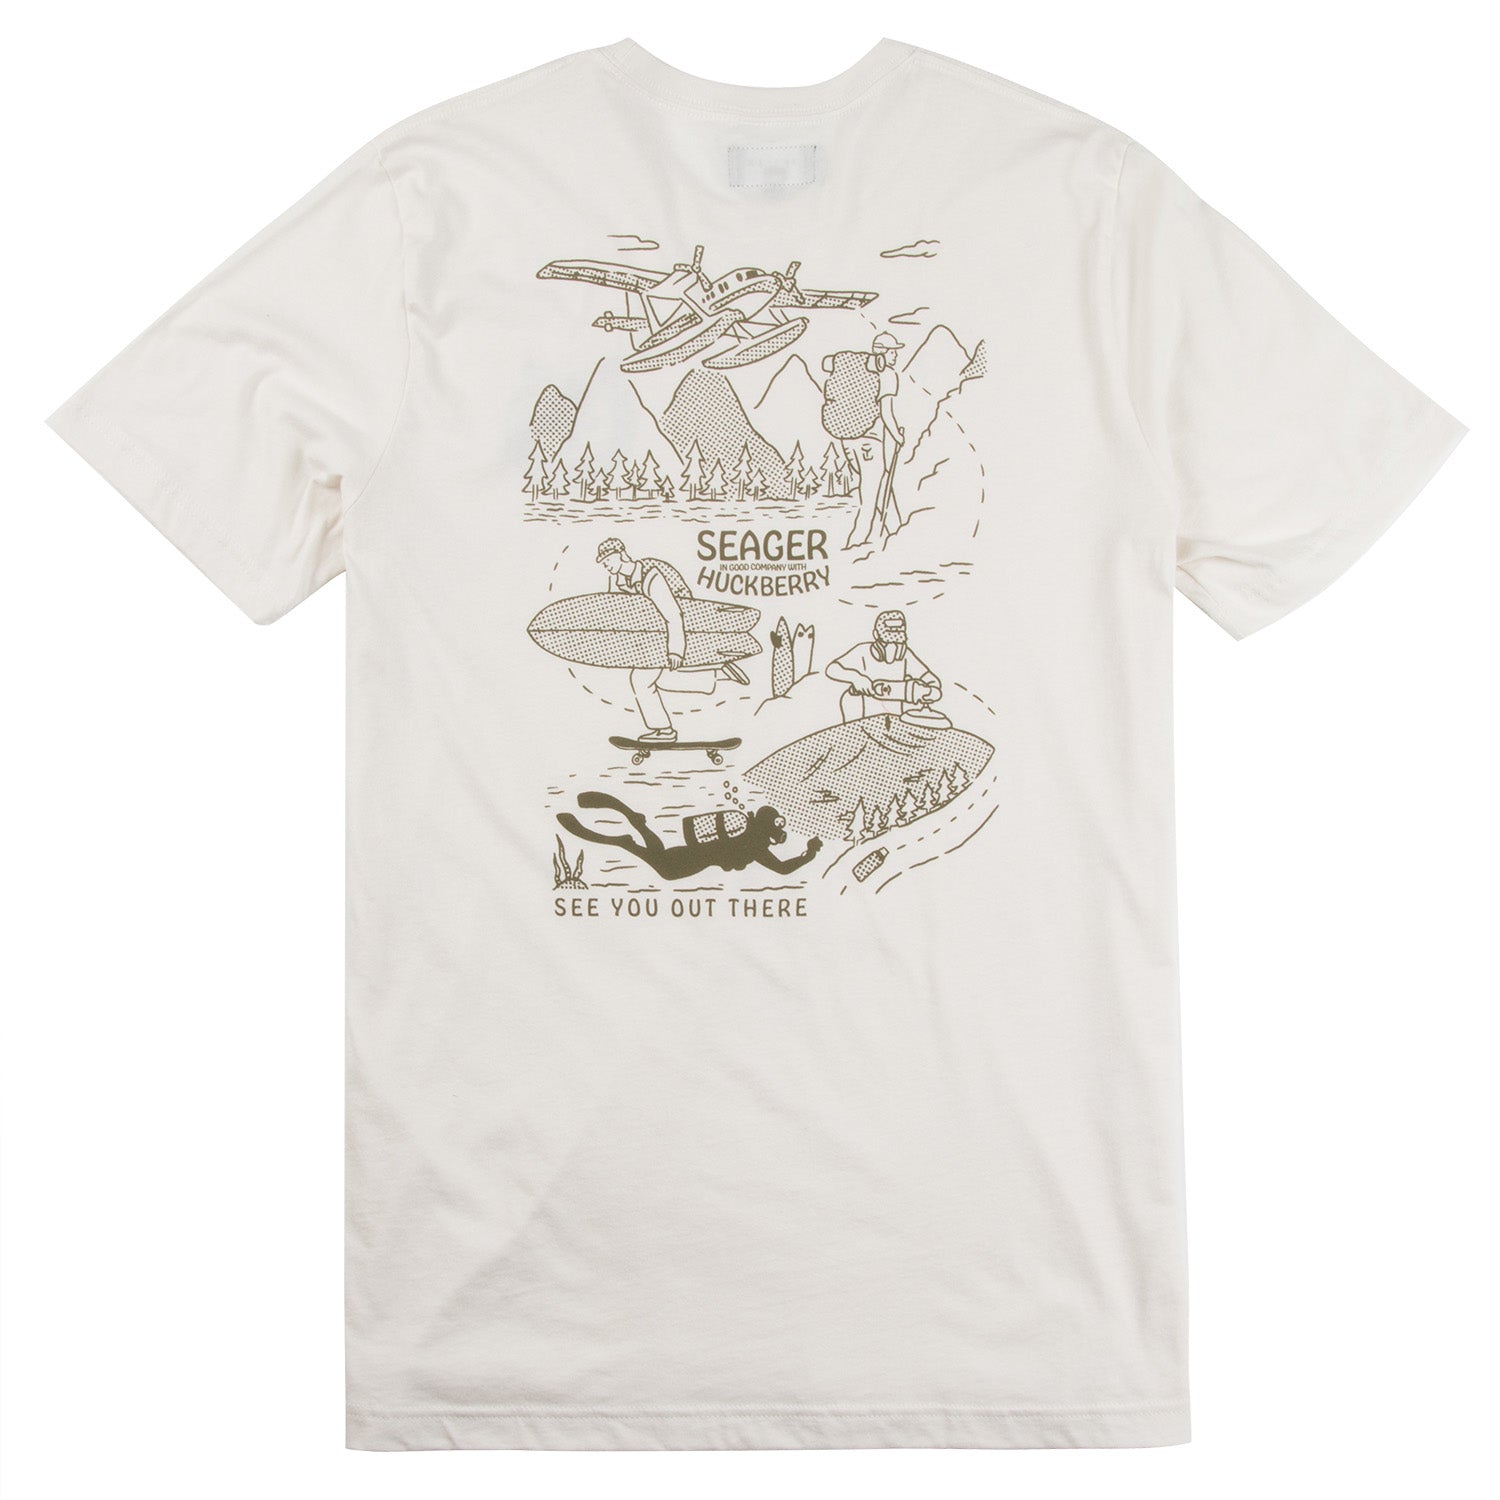 Seager x Huckberry Map Tee Vintage White